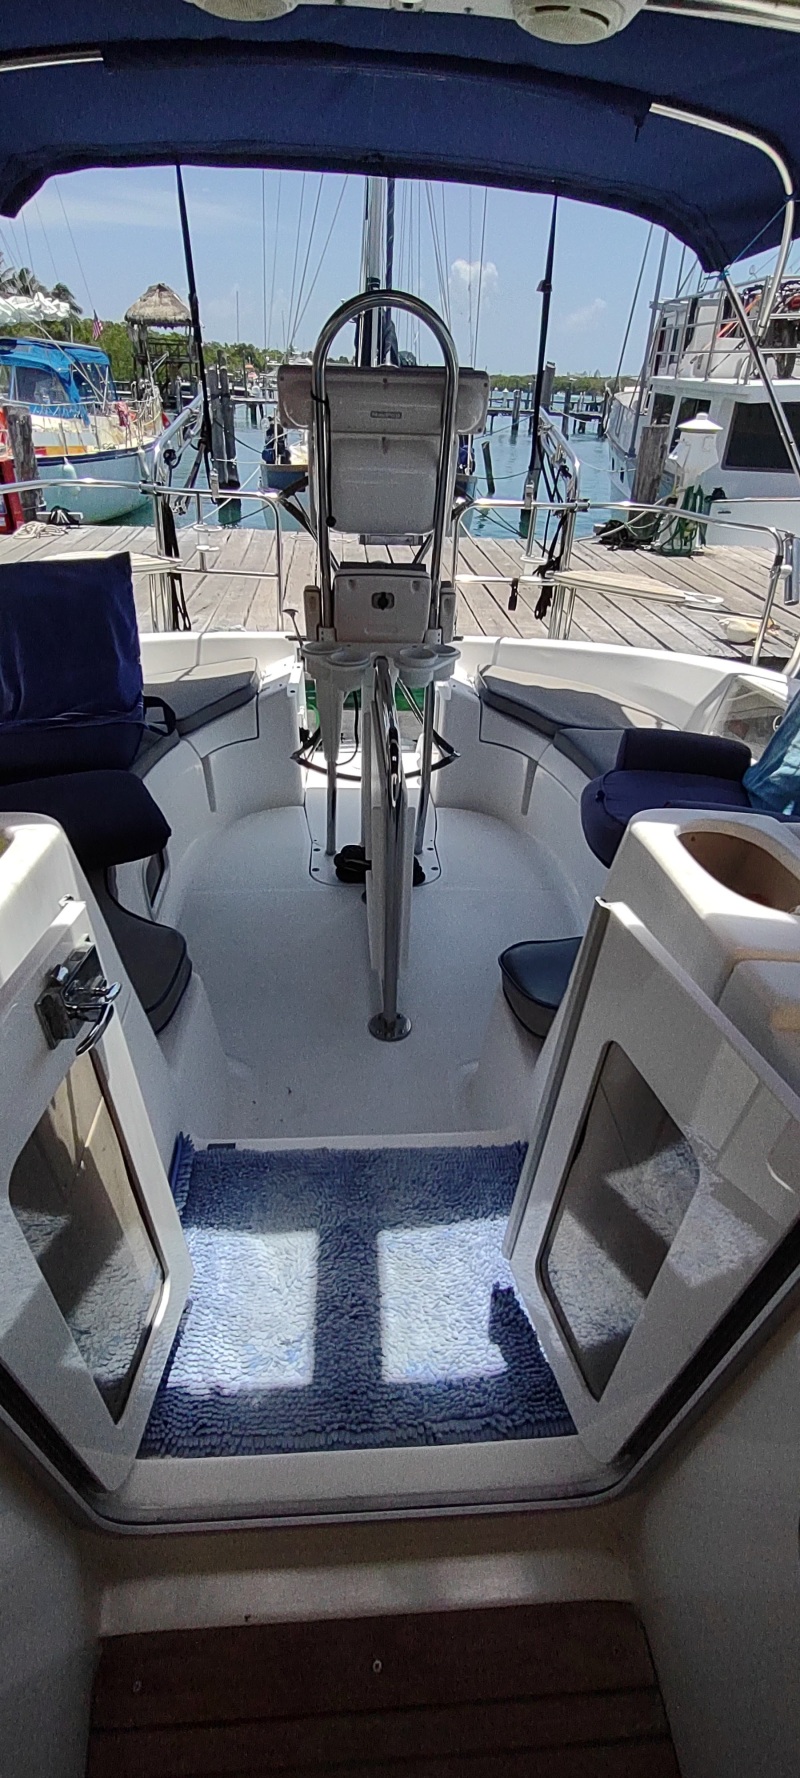 2005 Hunter 46LE Sailboat for sale in Mexico - image 3 